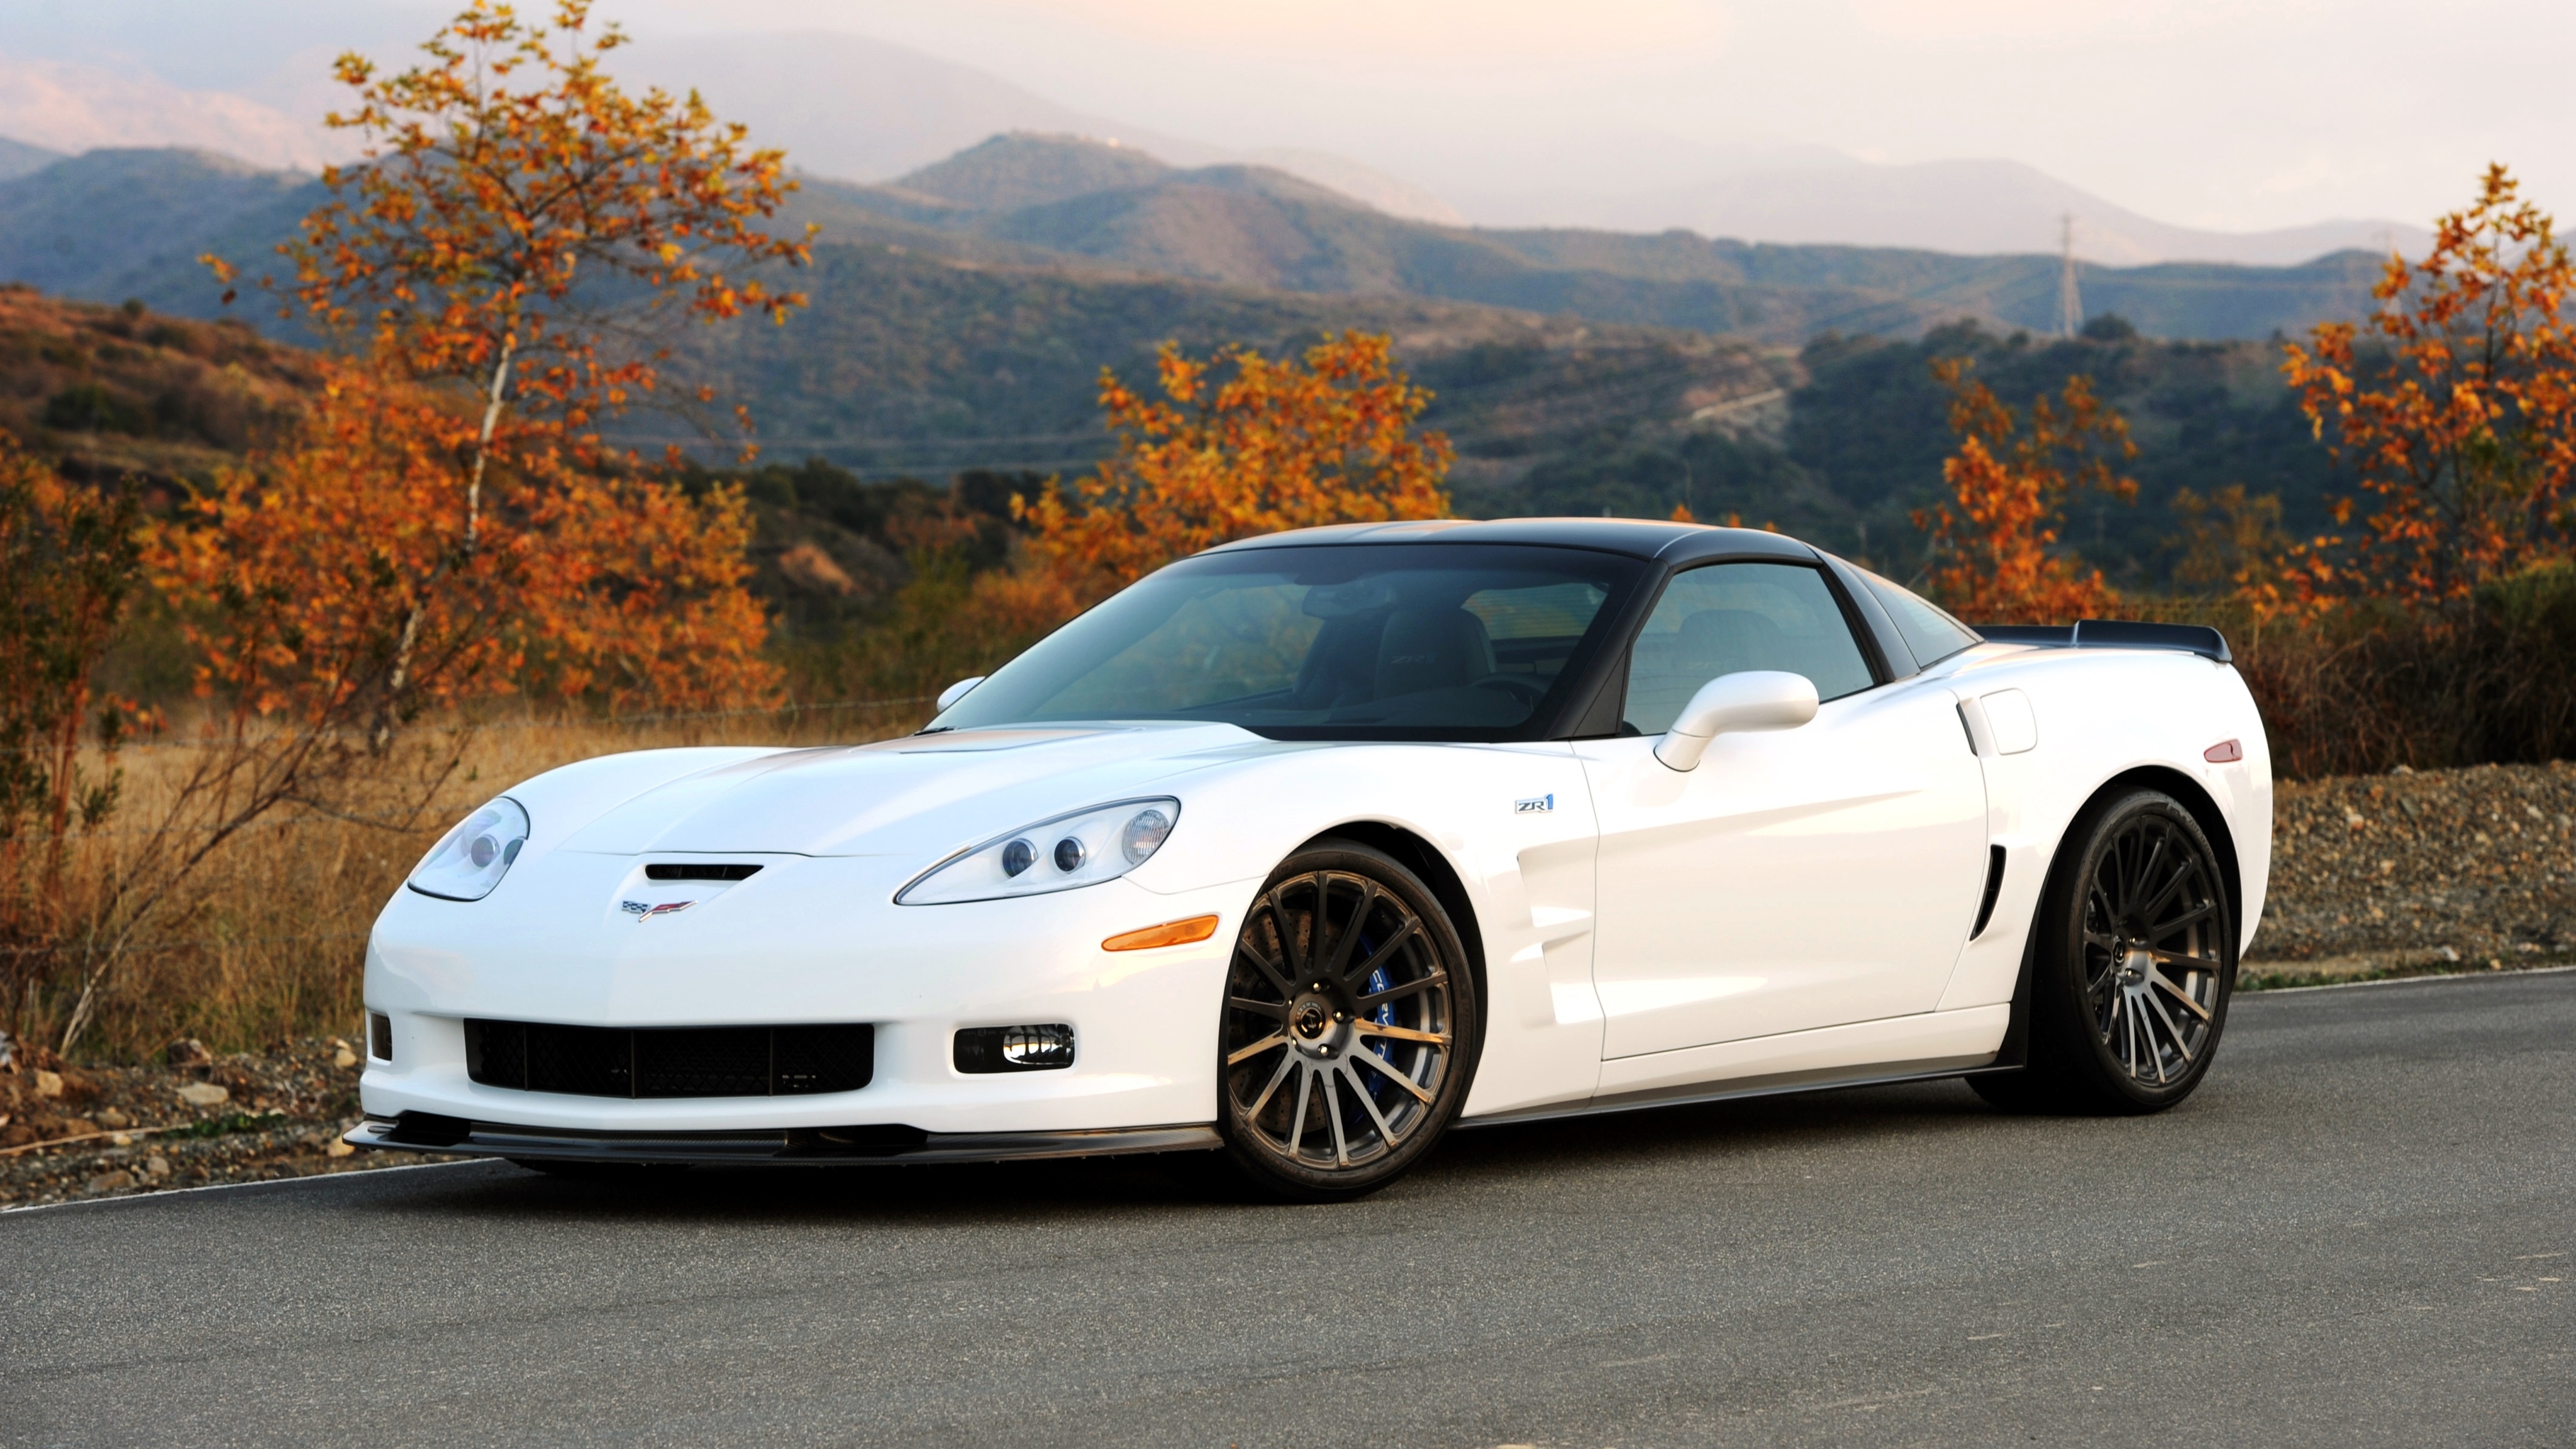 Free Images white, zr1, side view, c6 Chevrolet